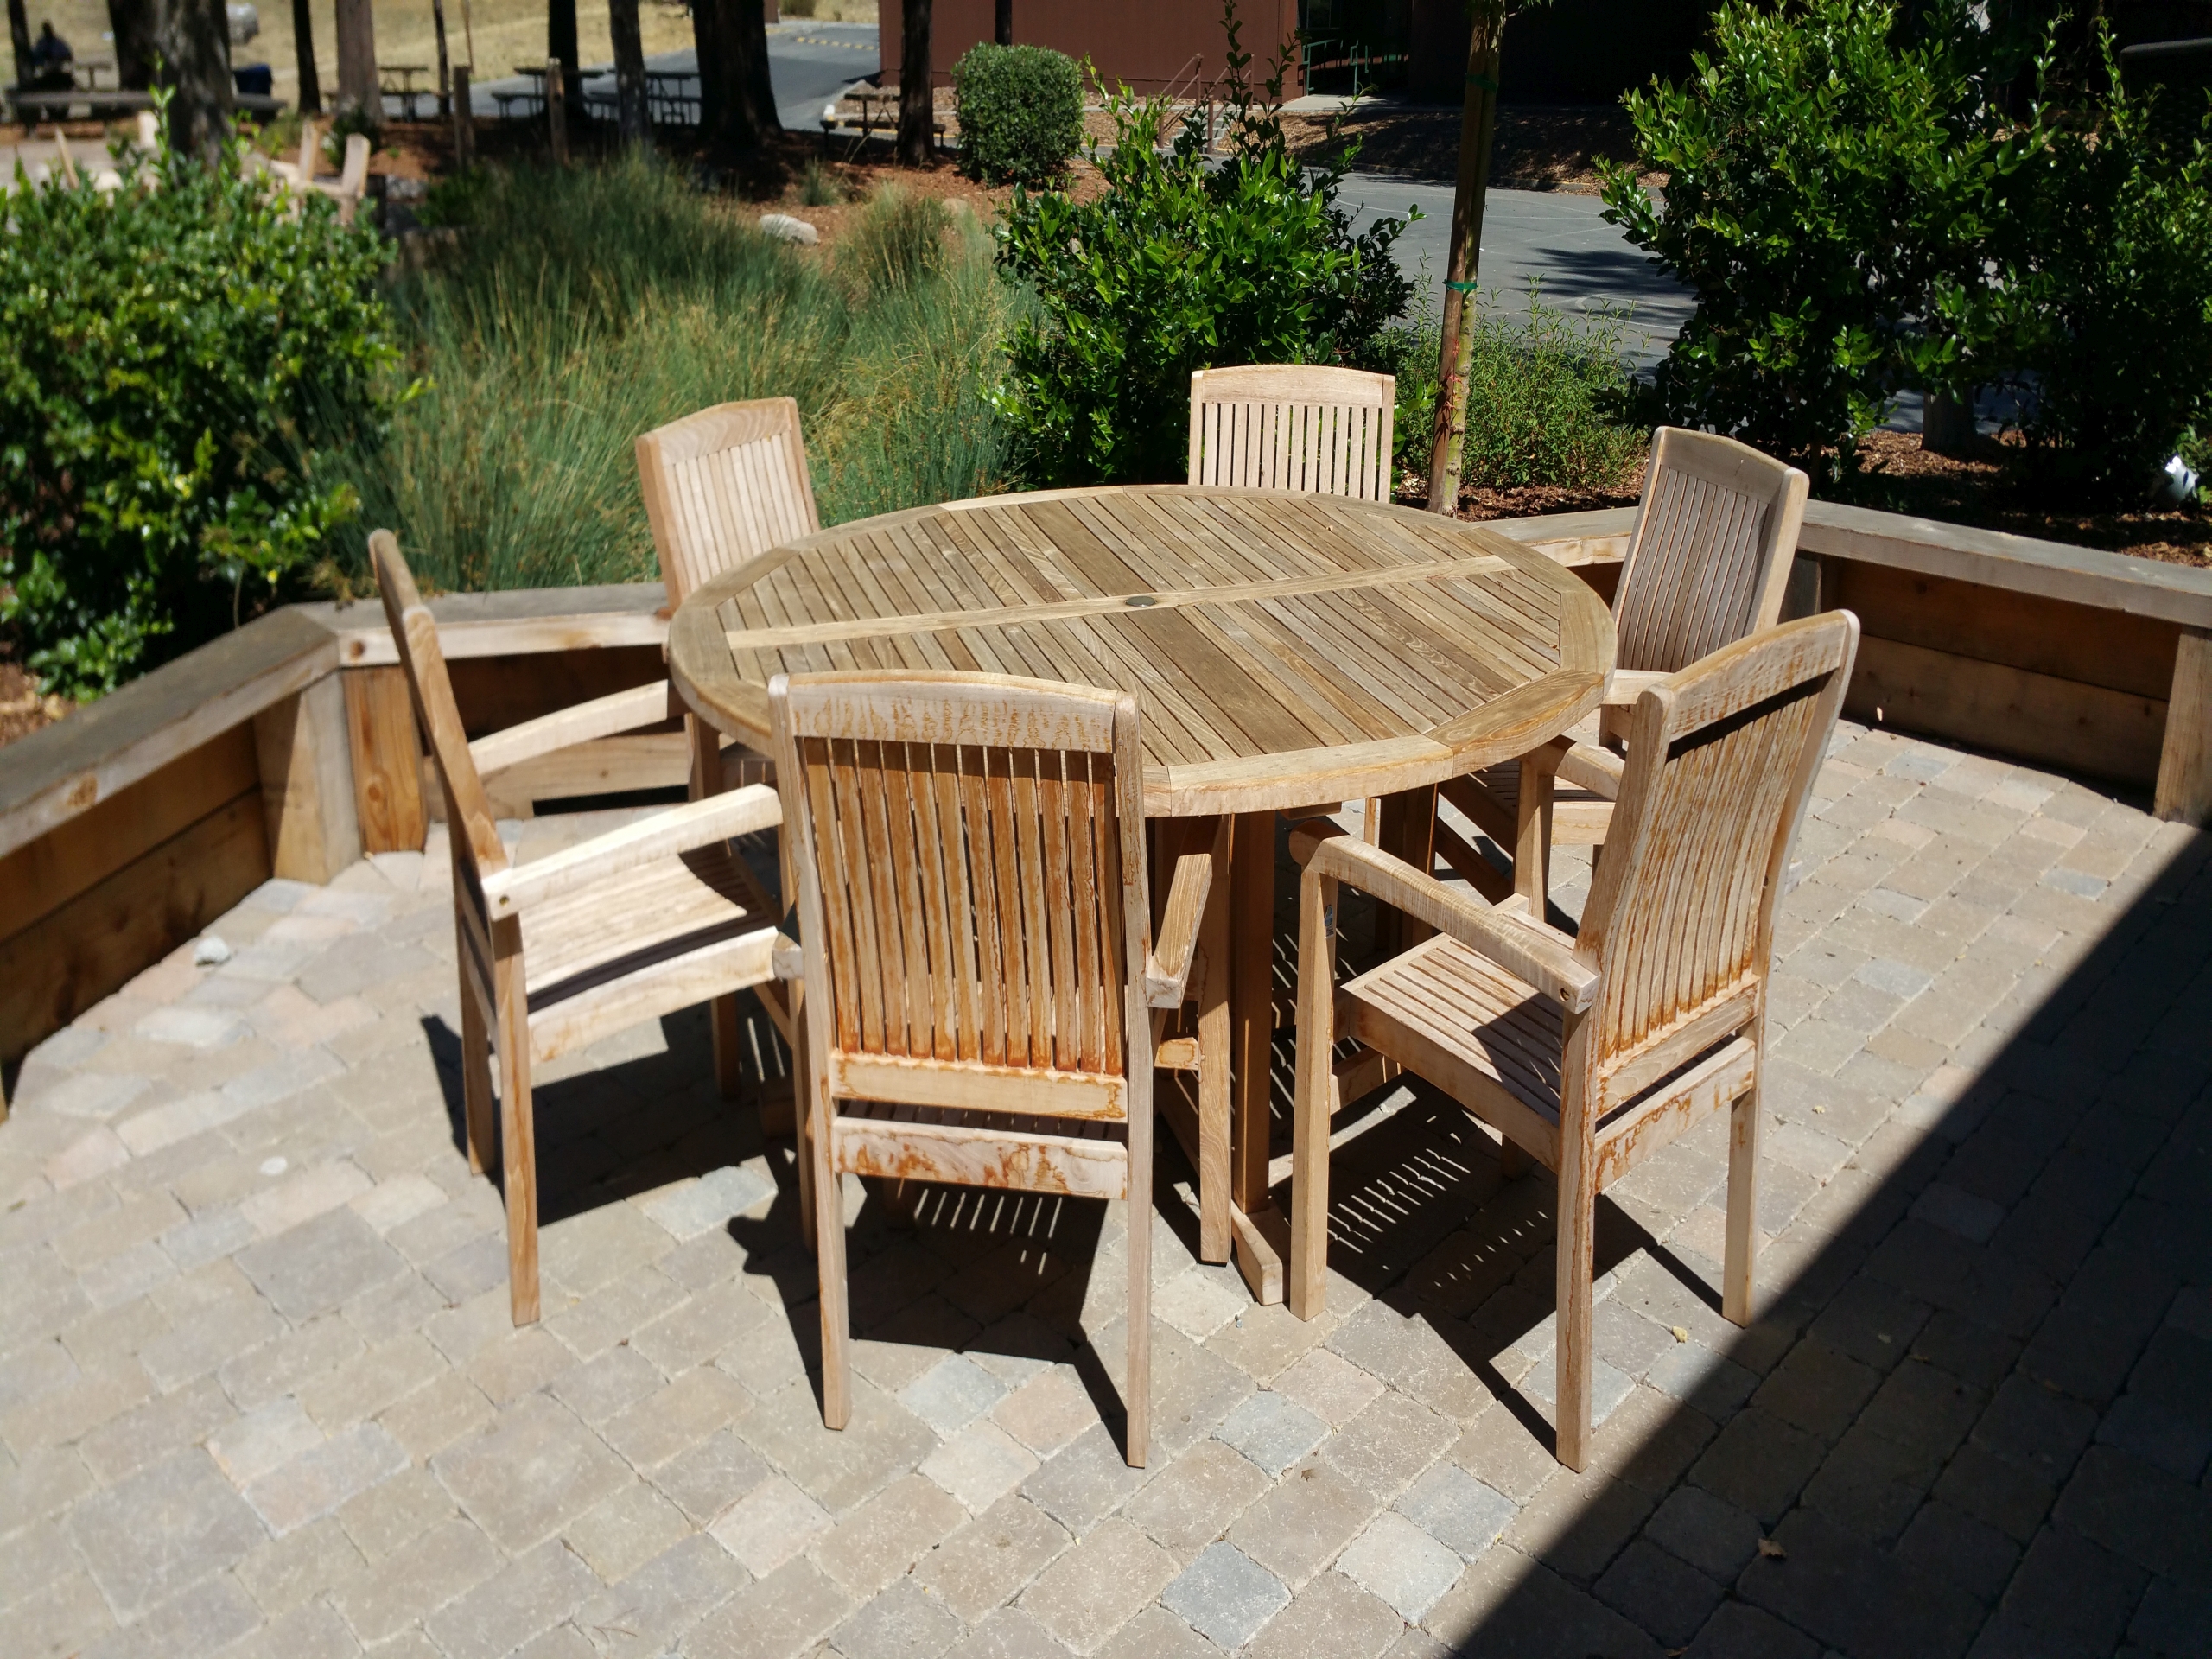 Transform Your Outdoor Space With Stunning Bulk Teak Furniture